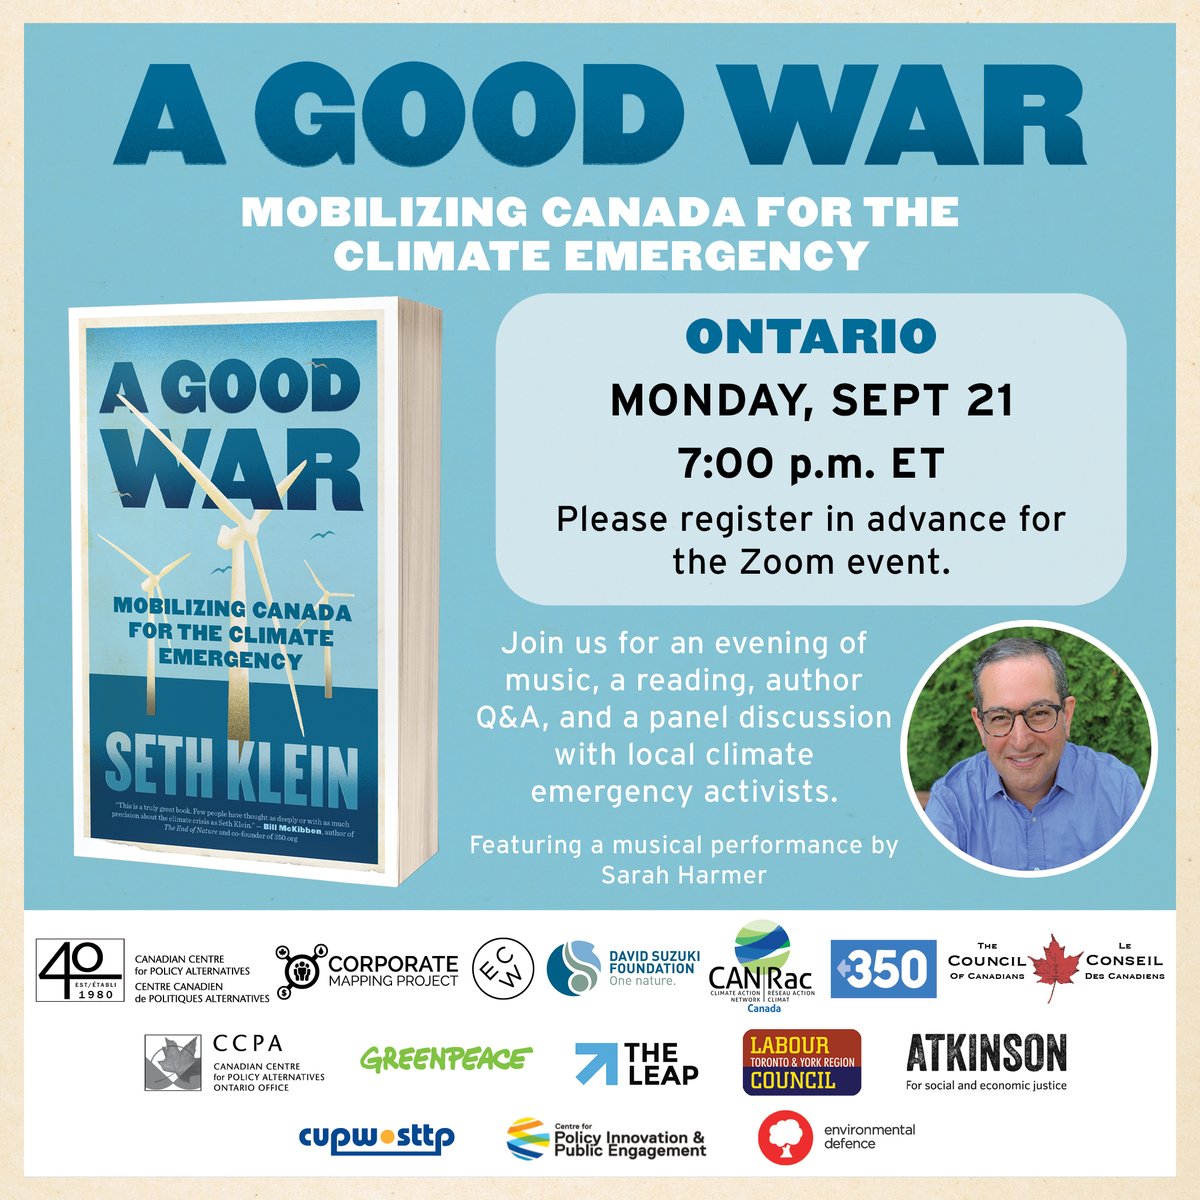 Sept 21 @ 7:00 is the Ontario Book Launch, with musical guest  @sarah_harmer and a terrific panel of local climate emergency activists. You can register here:  https://us02web.zoom.us/webinar/register/WN_bUCAZYvNSiuyjL225M3WBQ